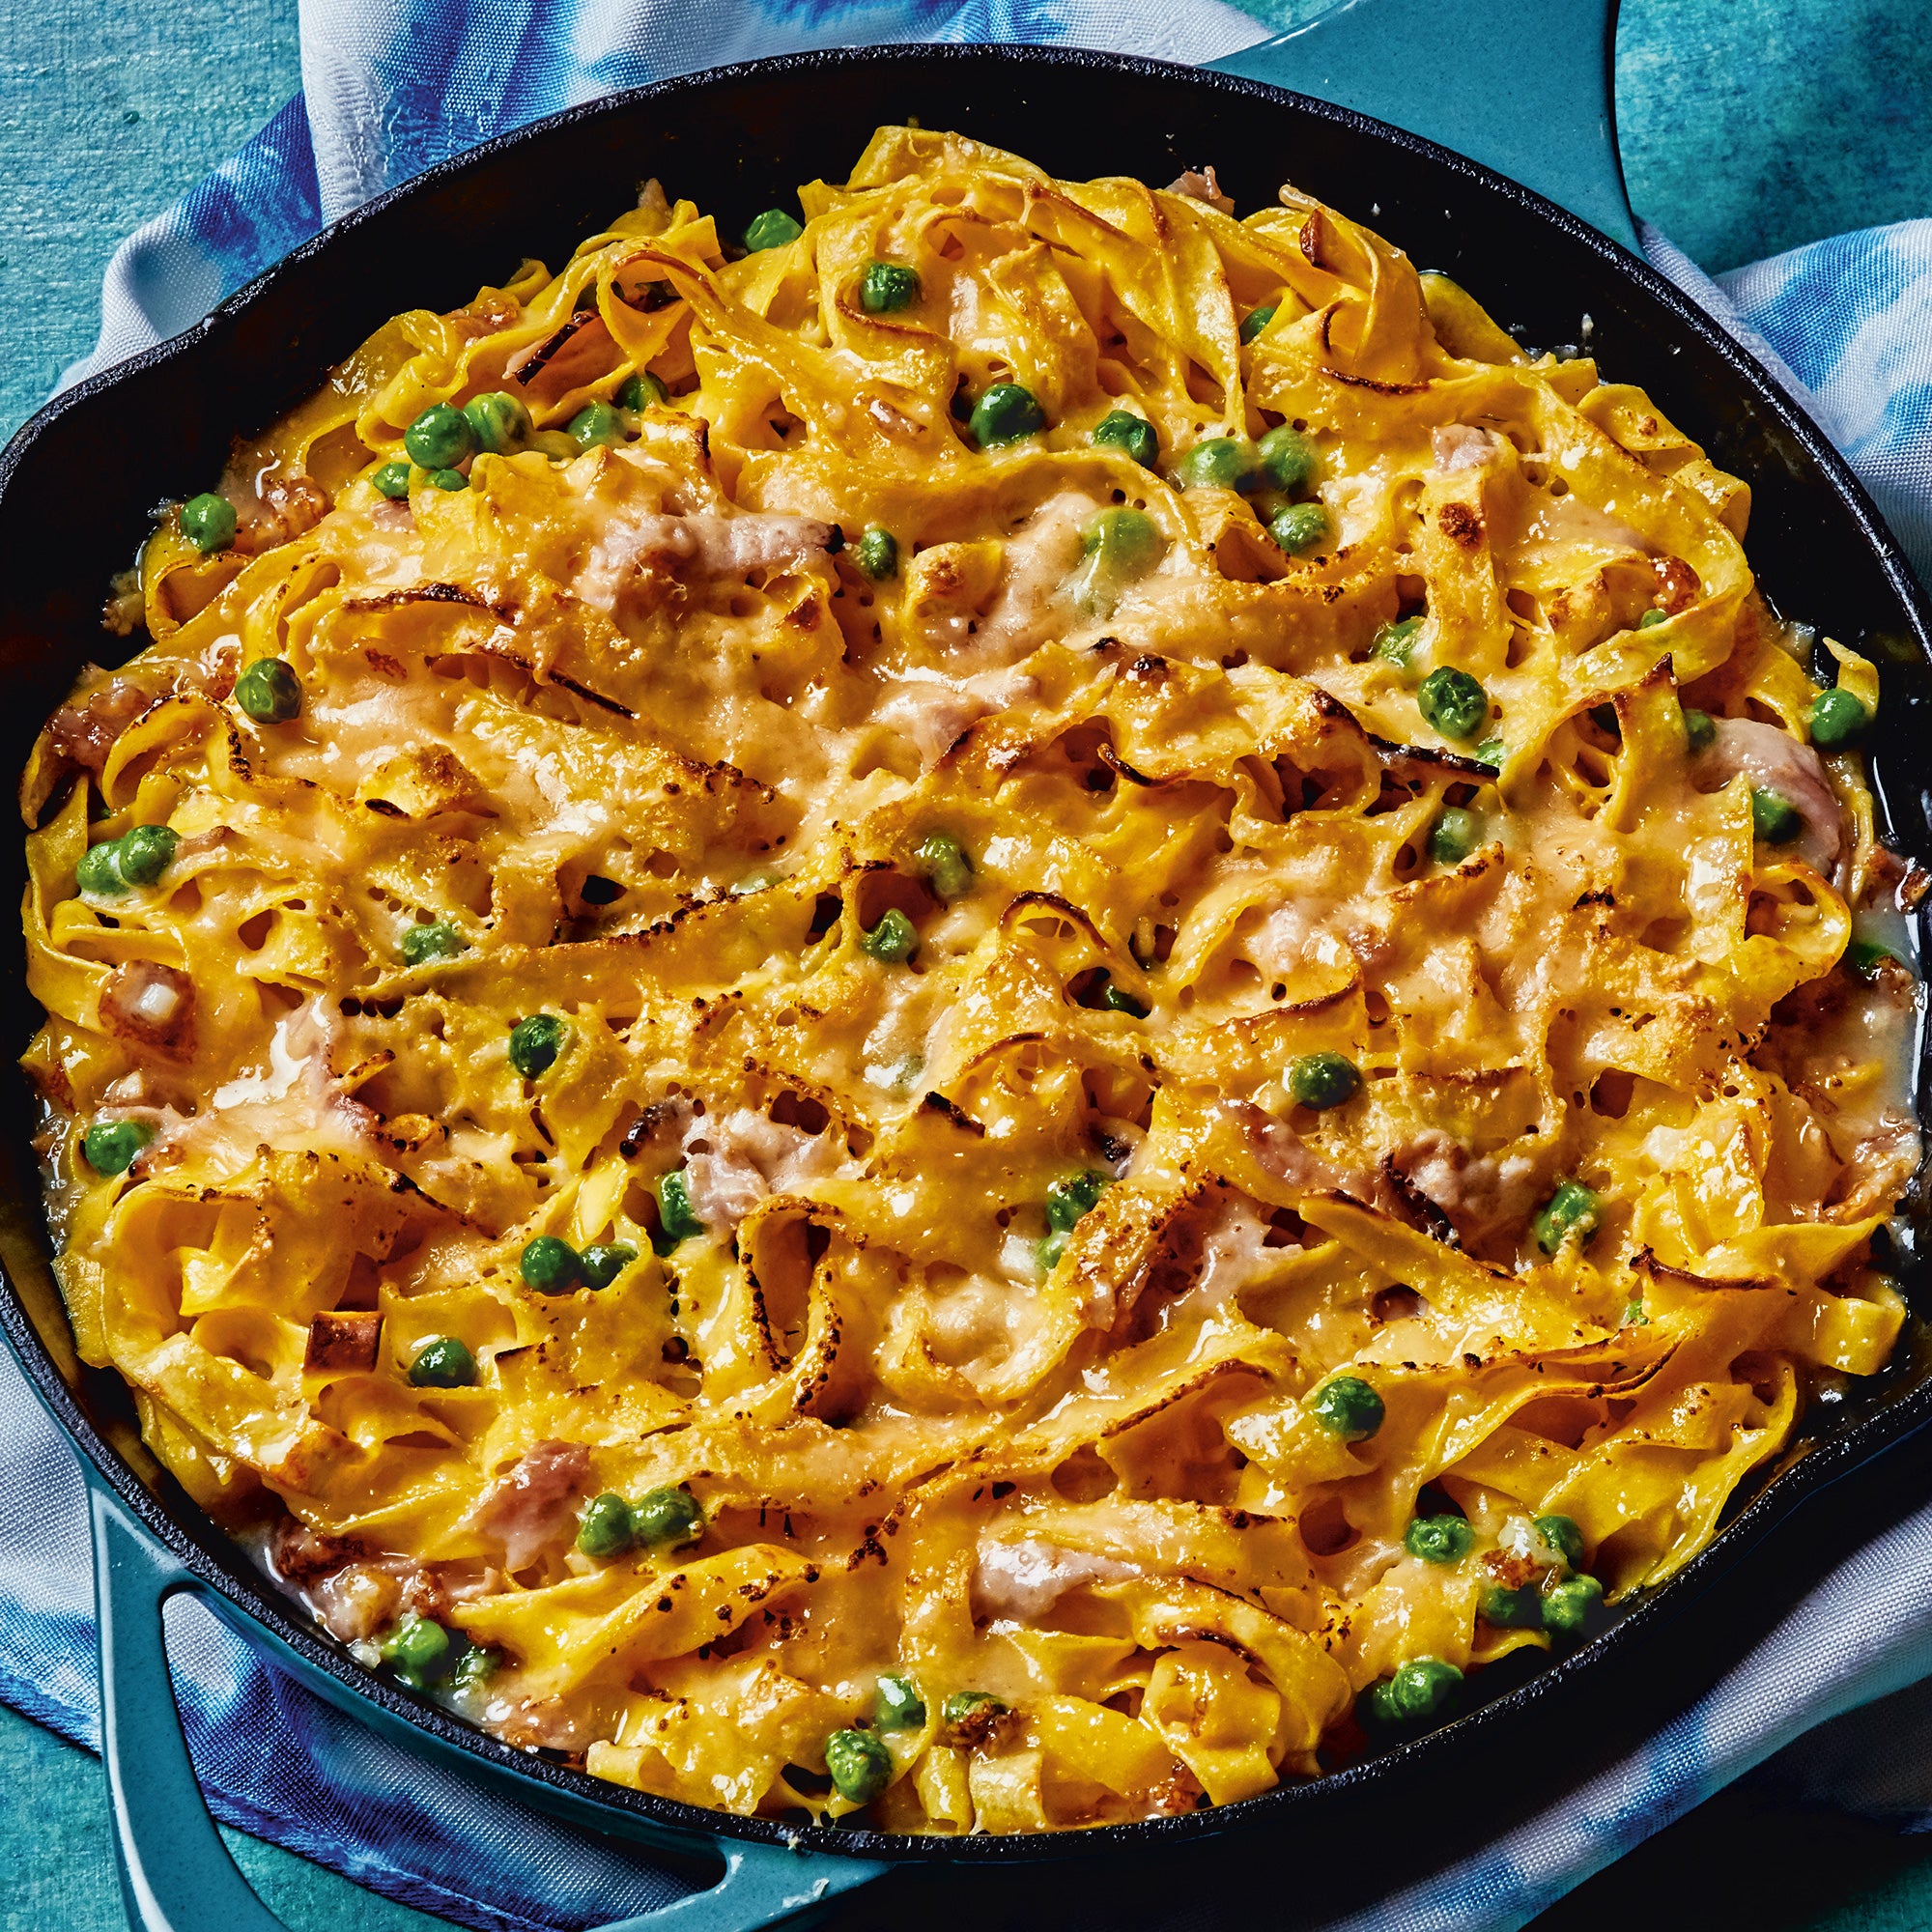 Baked Pasta with Peas & Ham